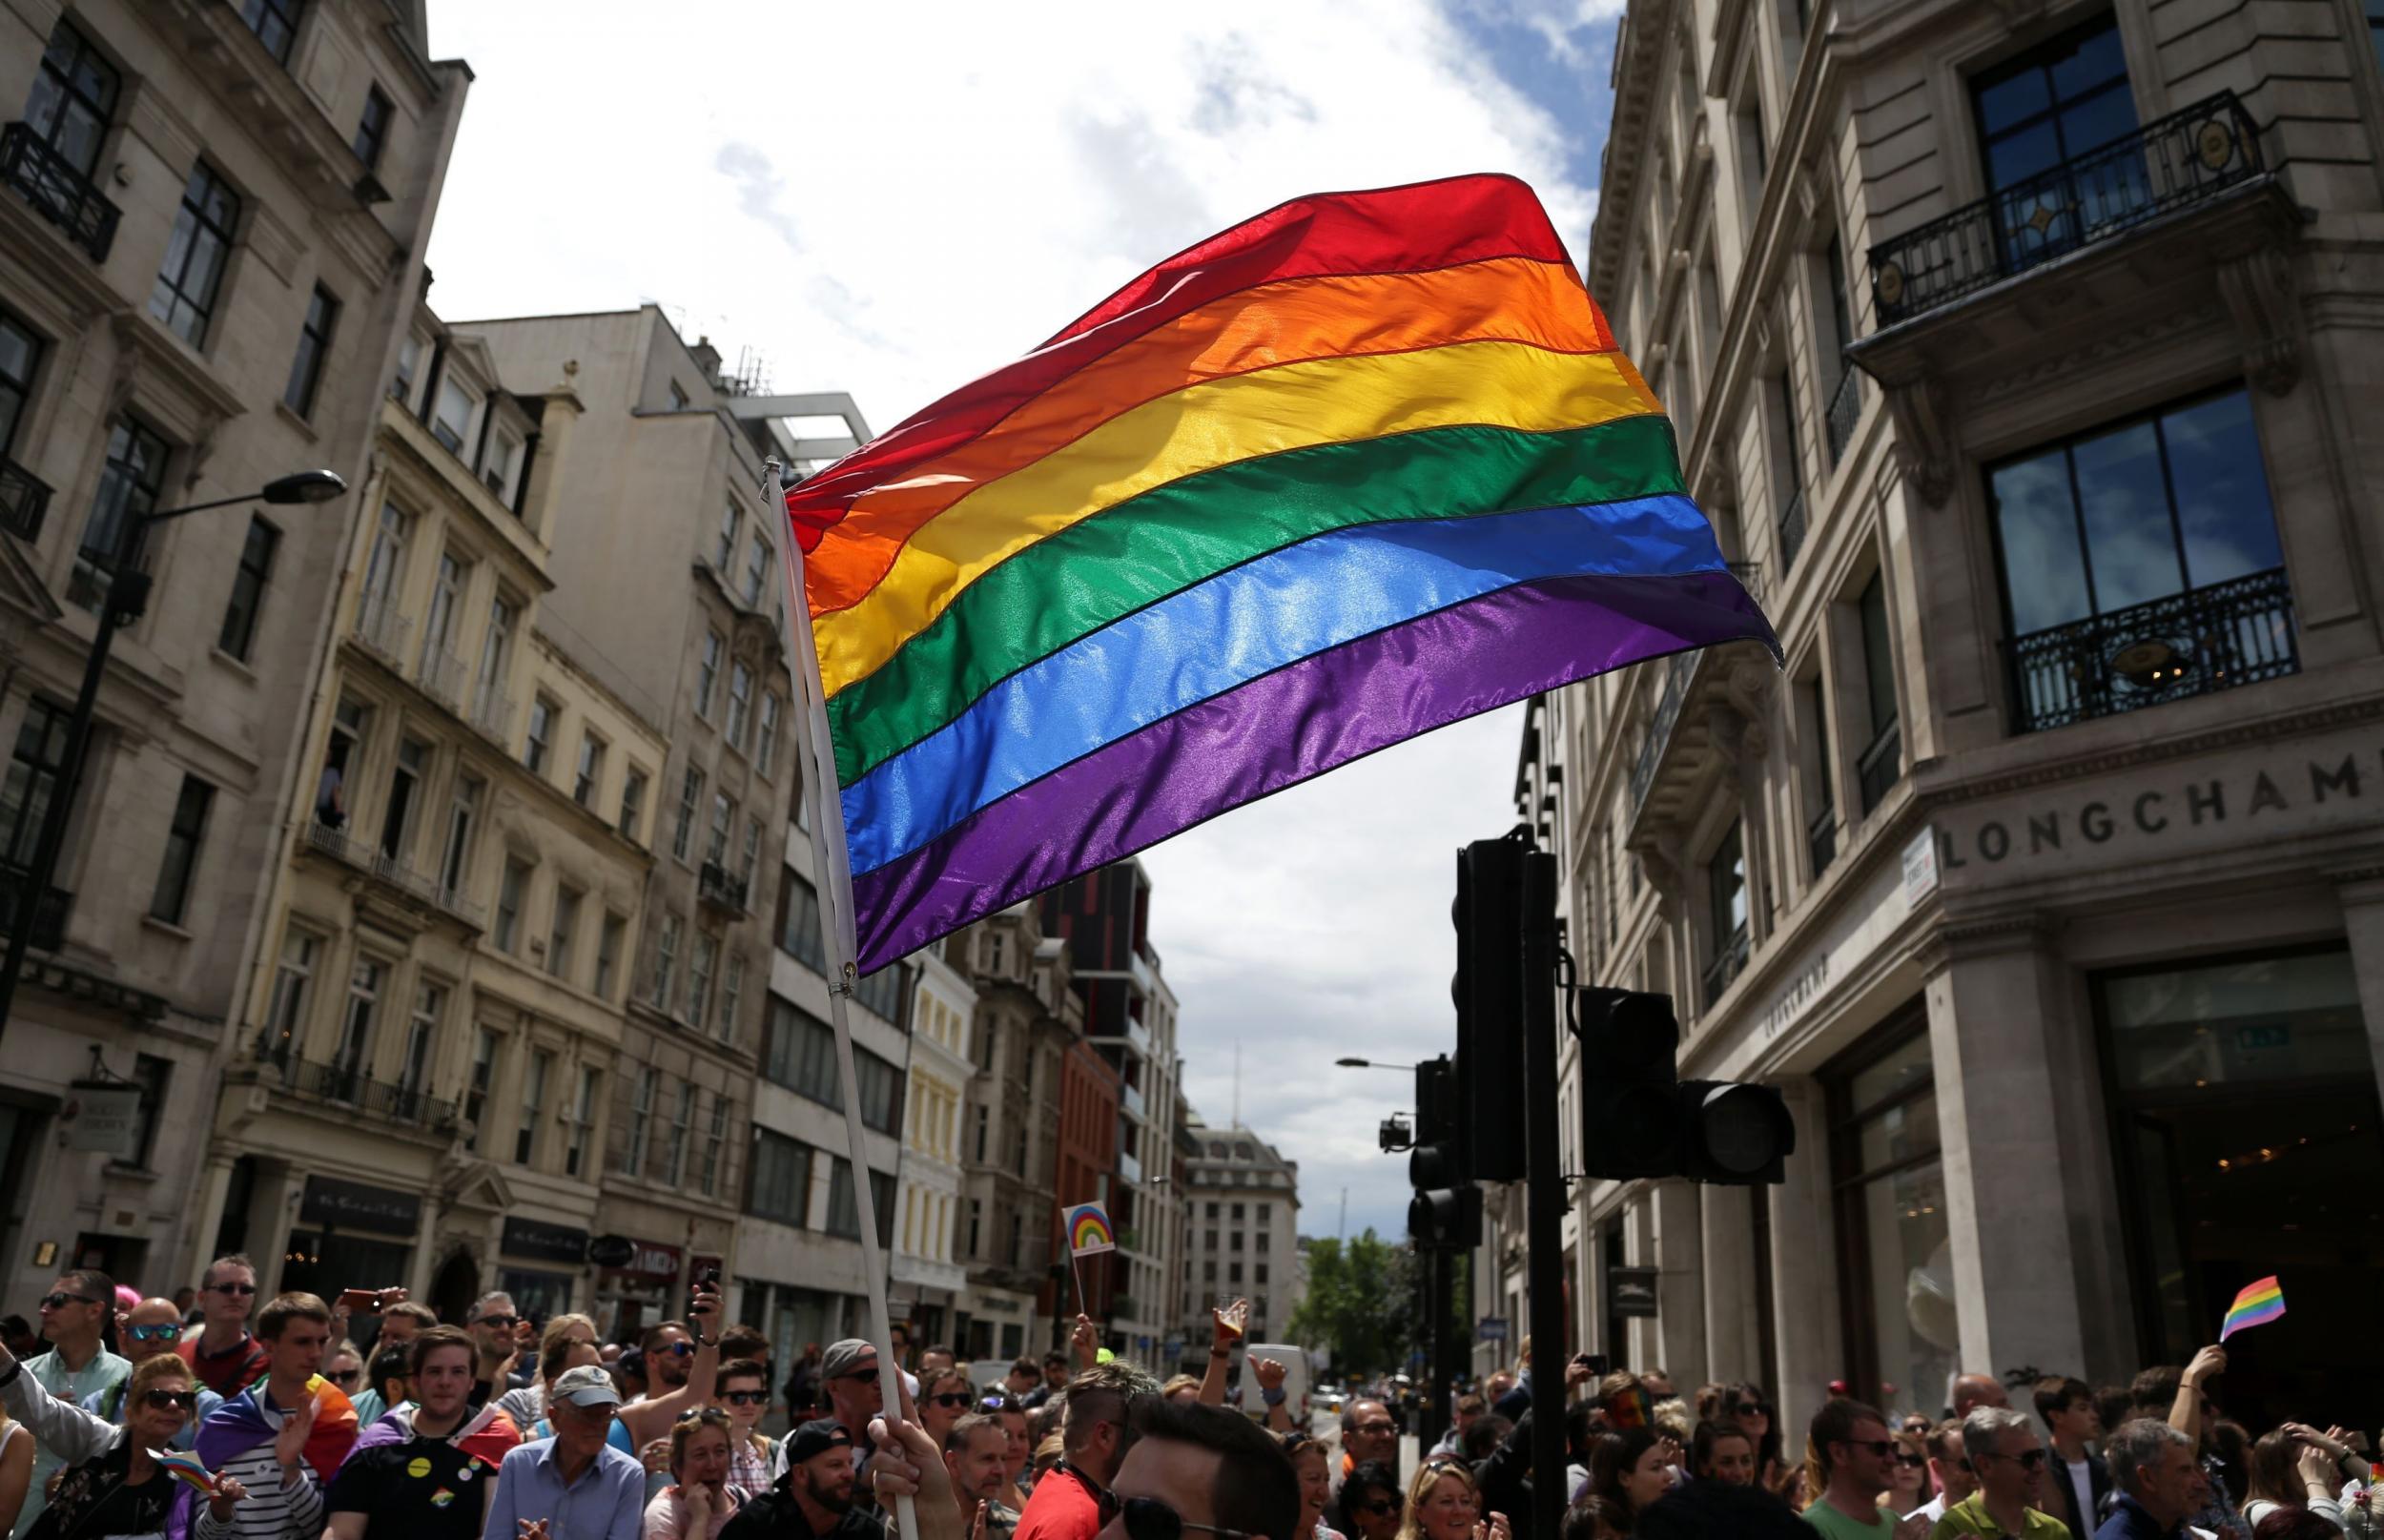 London's annual Pride festival grows bigger every year